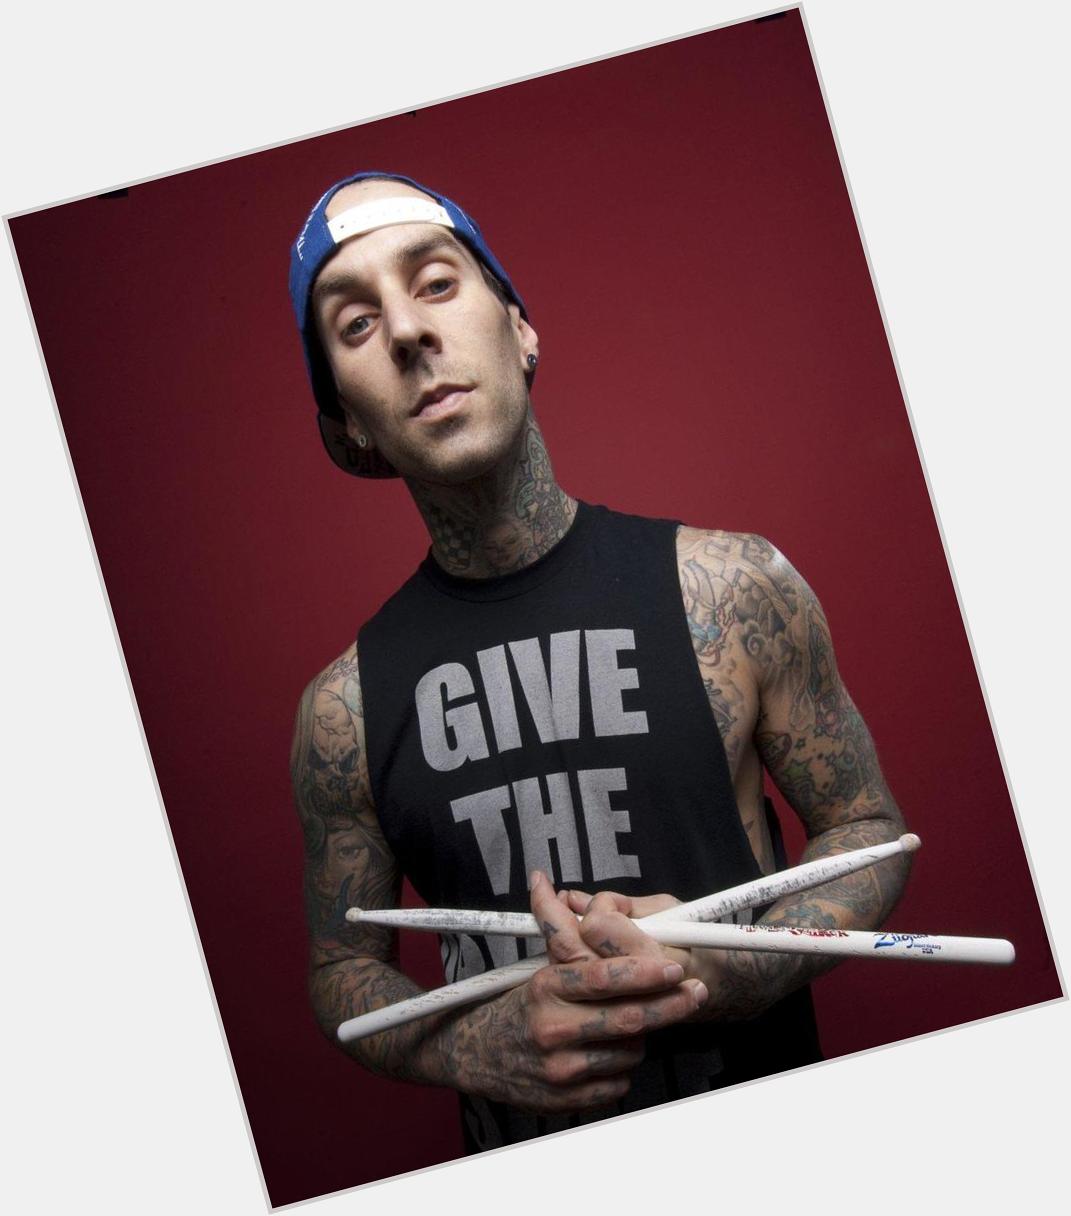 Rt if you wish a Happy birthday to 
Travis Barker 
drummer from Blink 182 